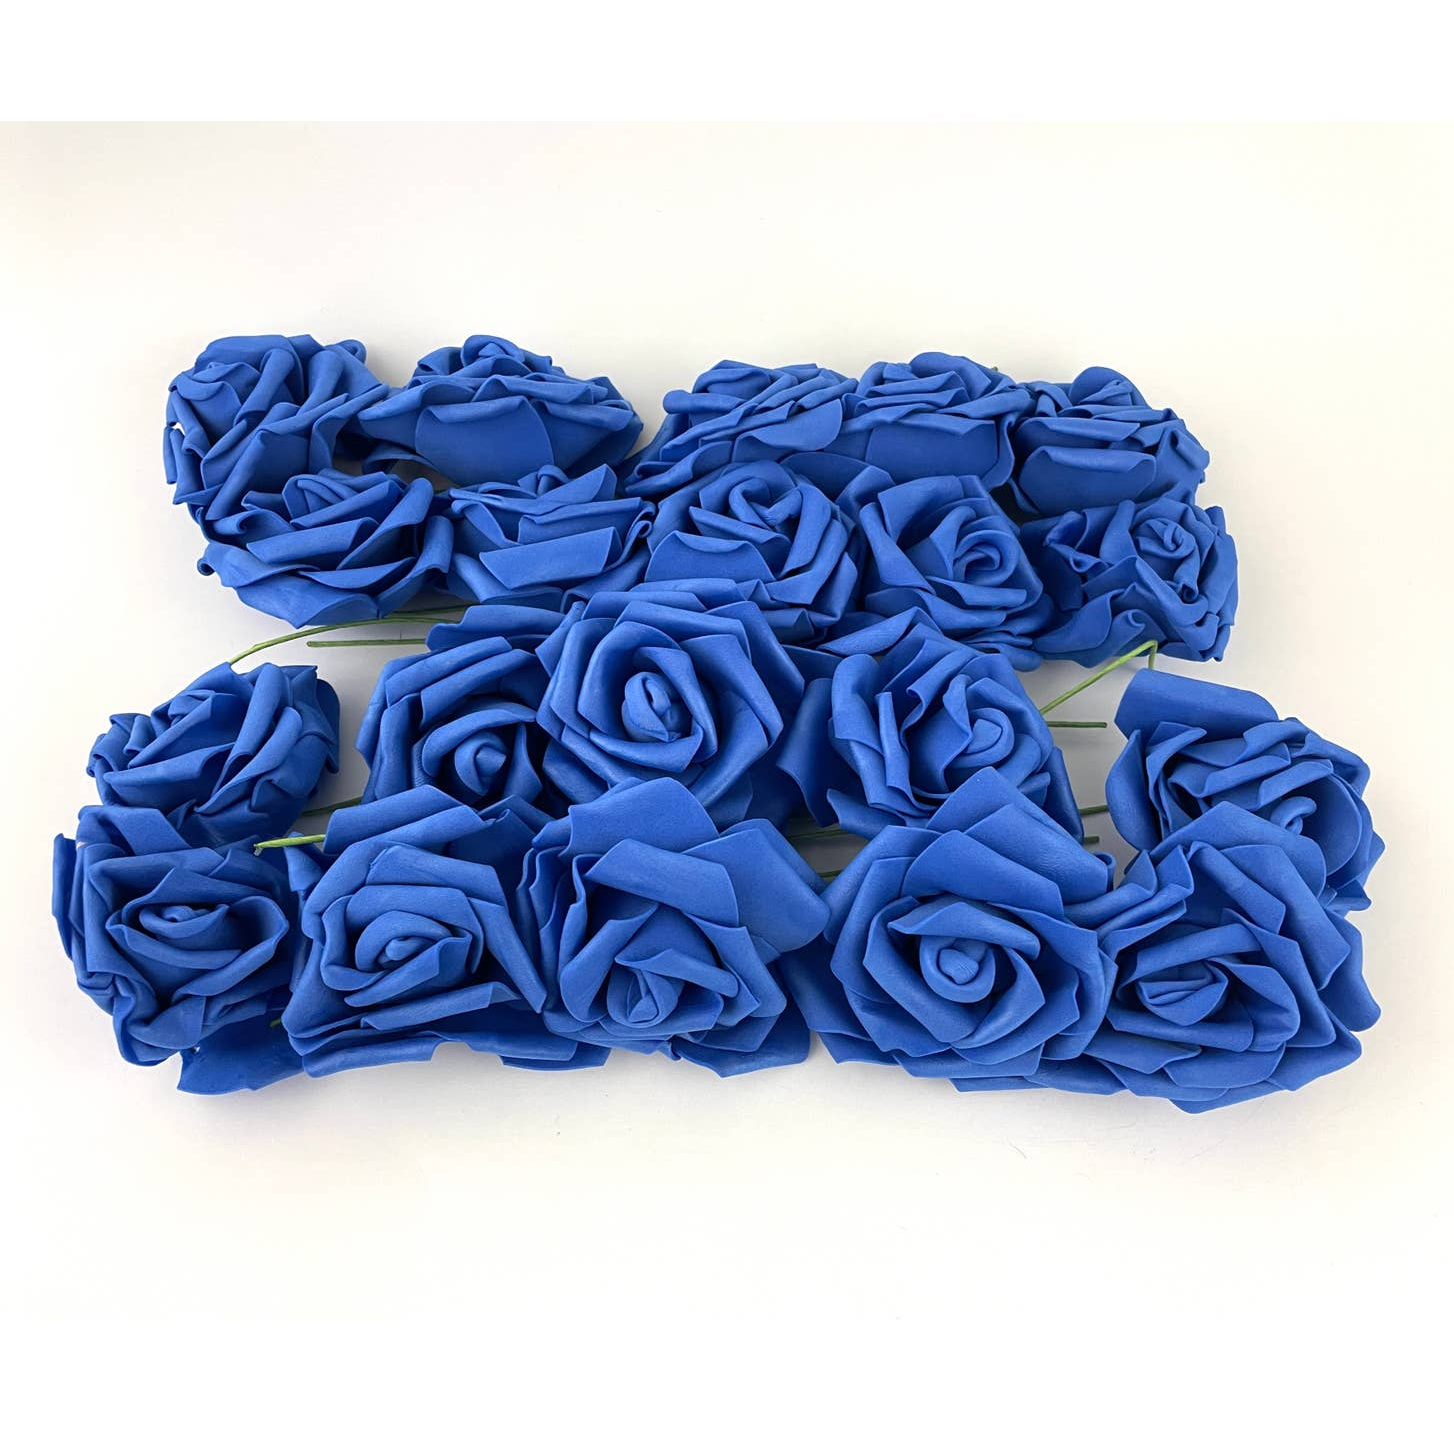 Primary image for 20 PC Blue 3" Foam Flower Rose Wire Stem Single NEW Wedding Bridal Parties